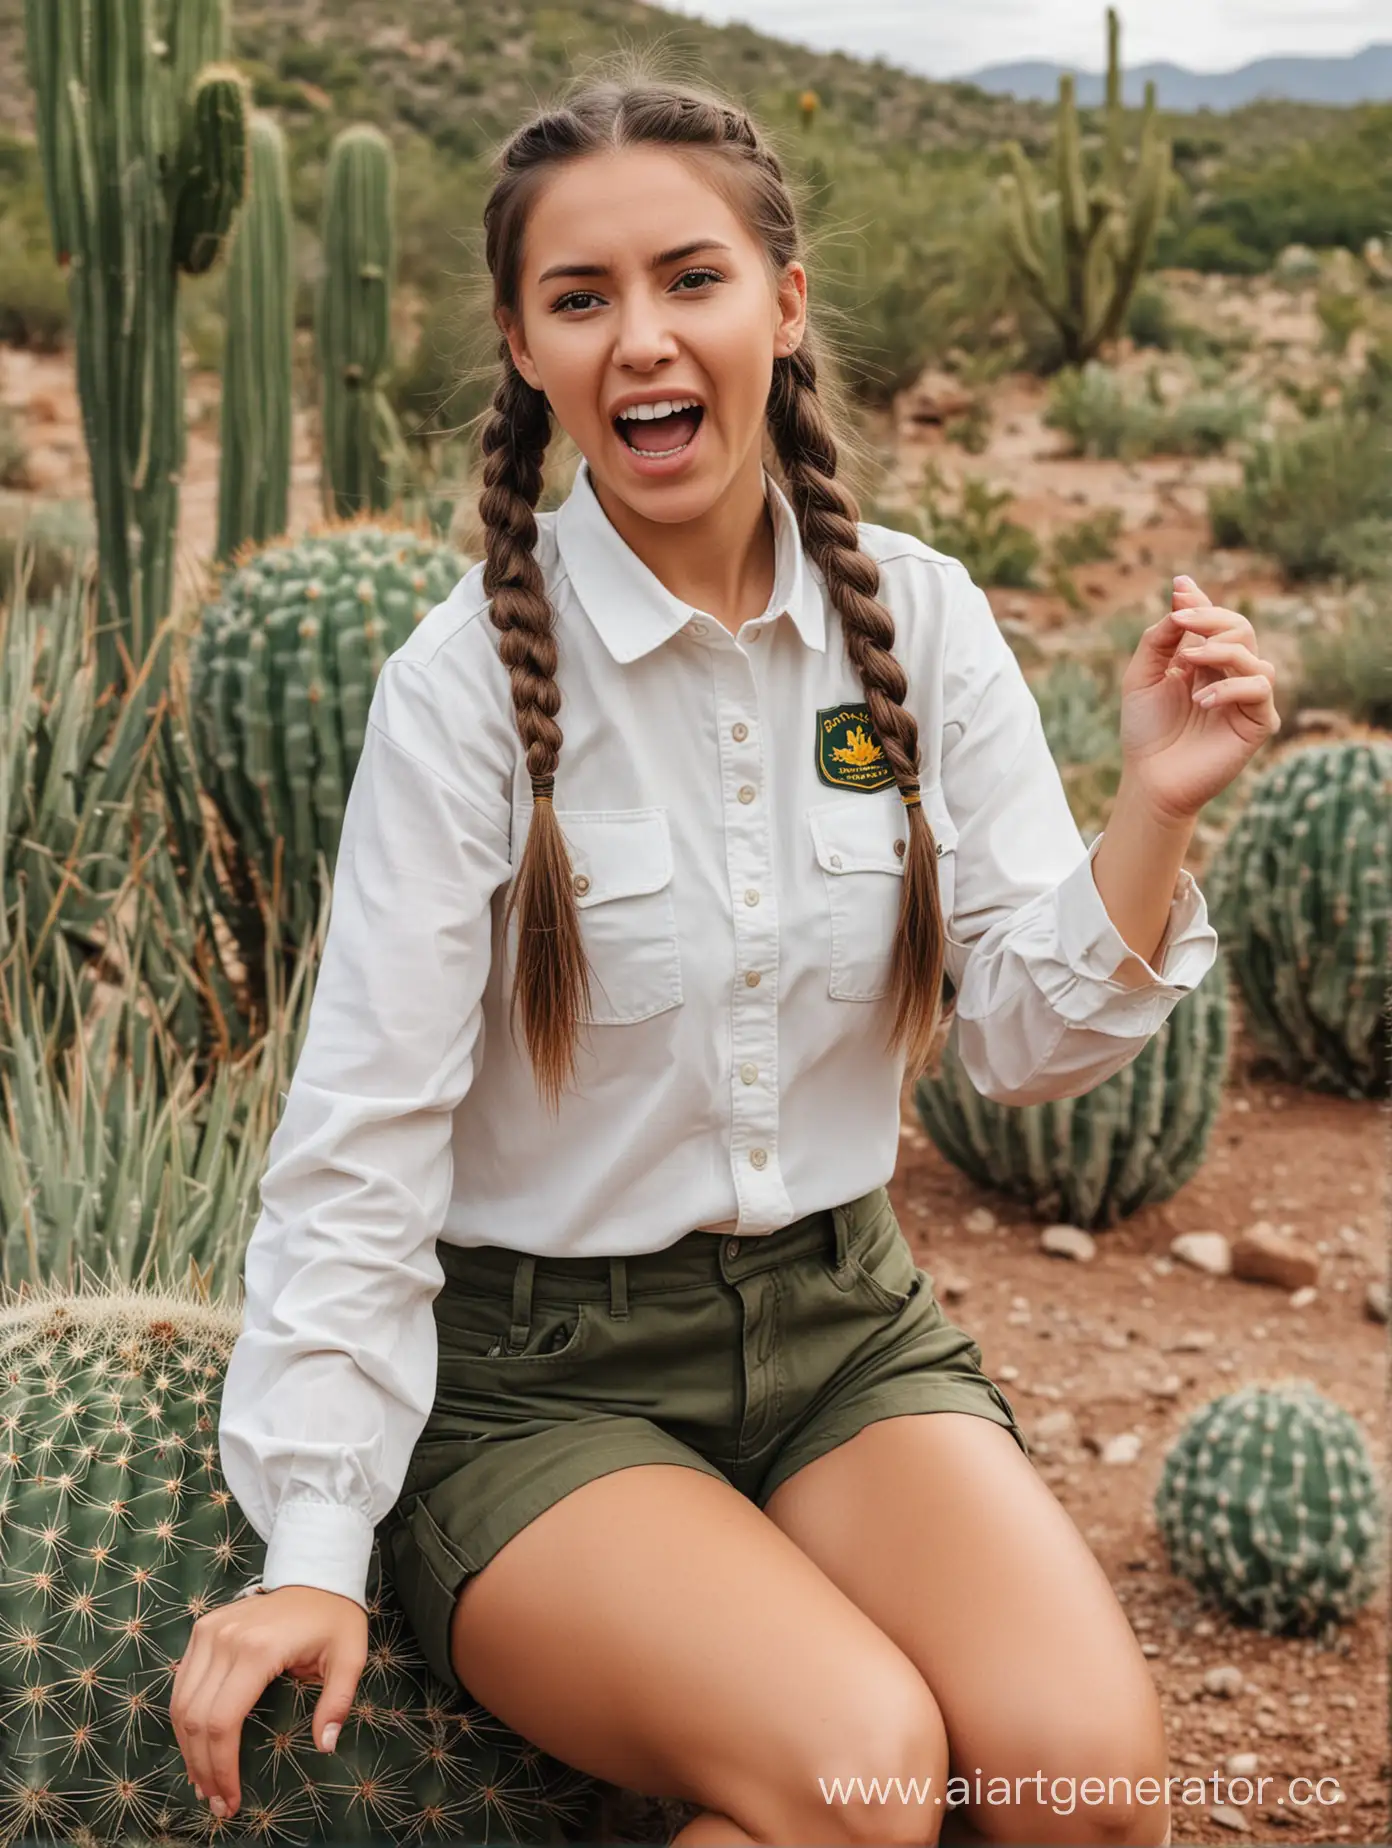 Indigenous-Girl-in-Park-Ranger-Attire-Sitting-on-Cactus-and-Screaming